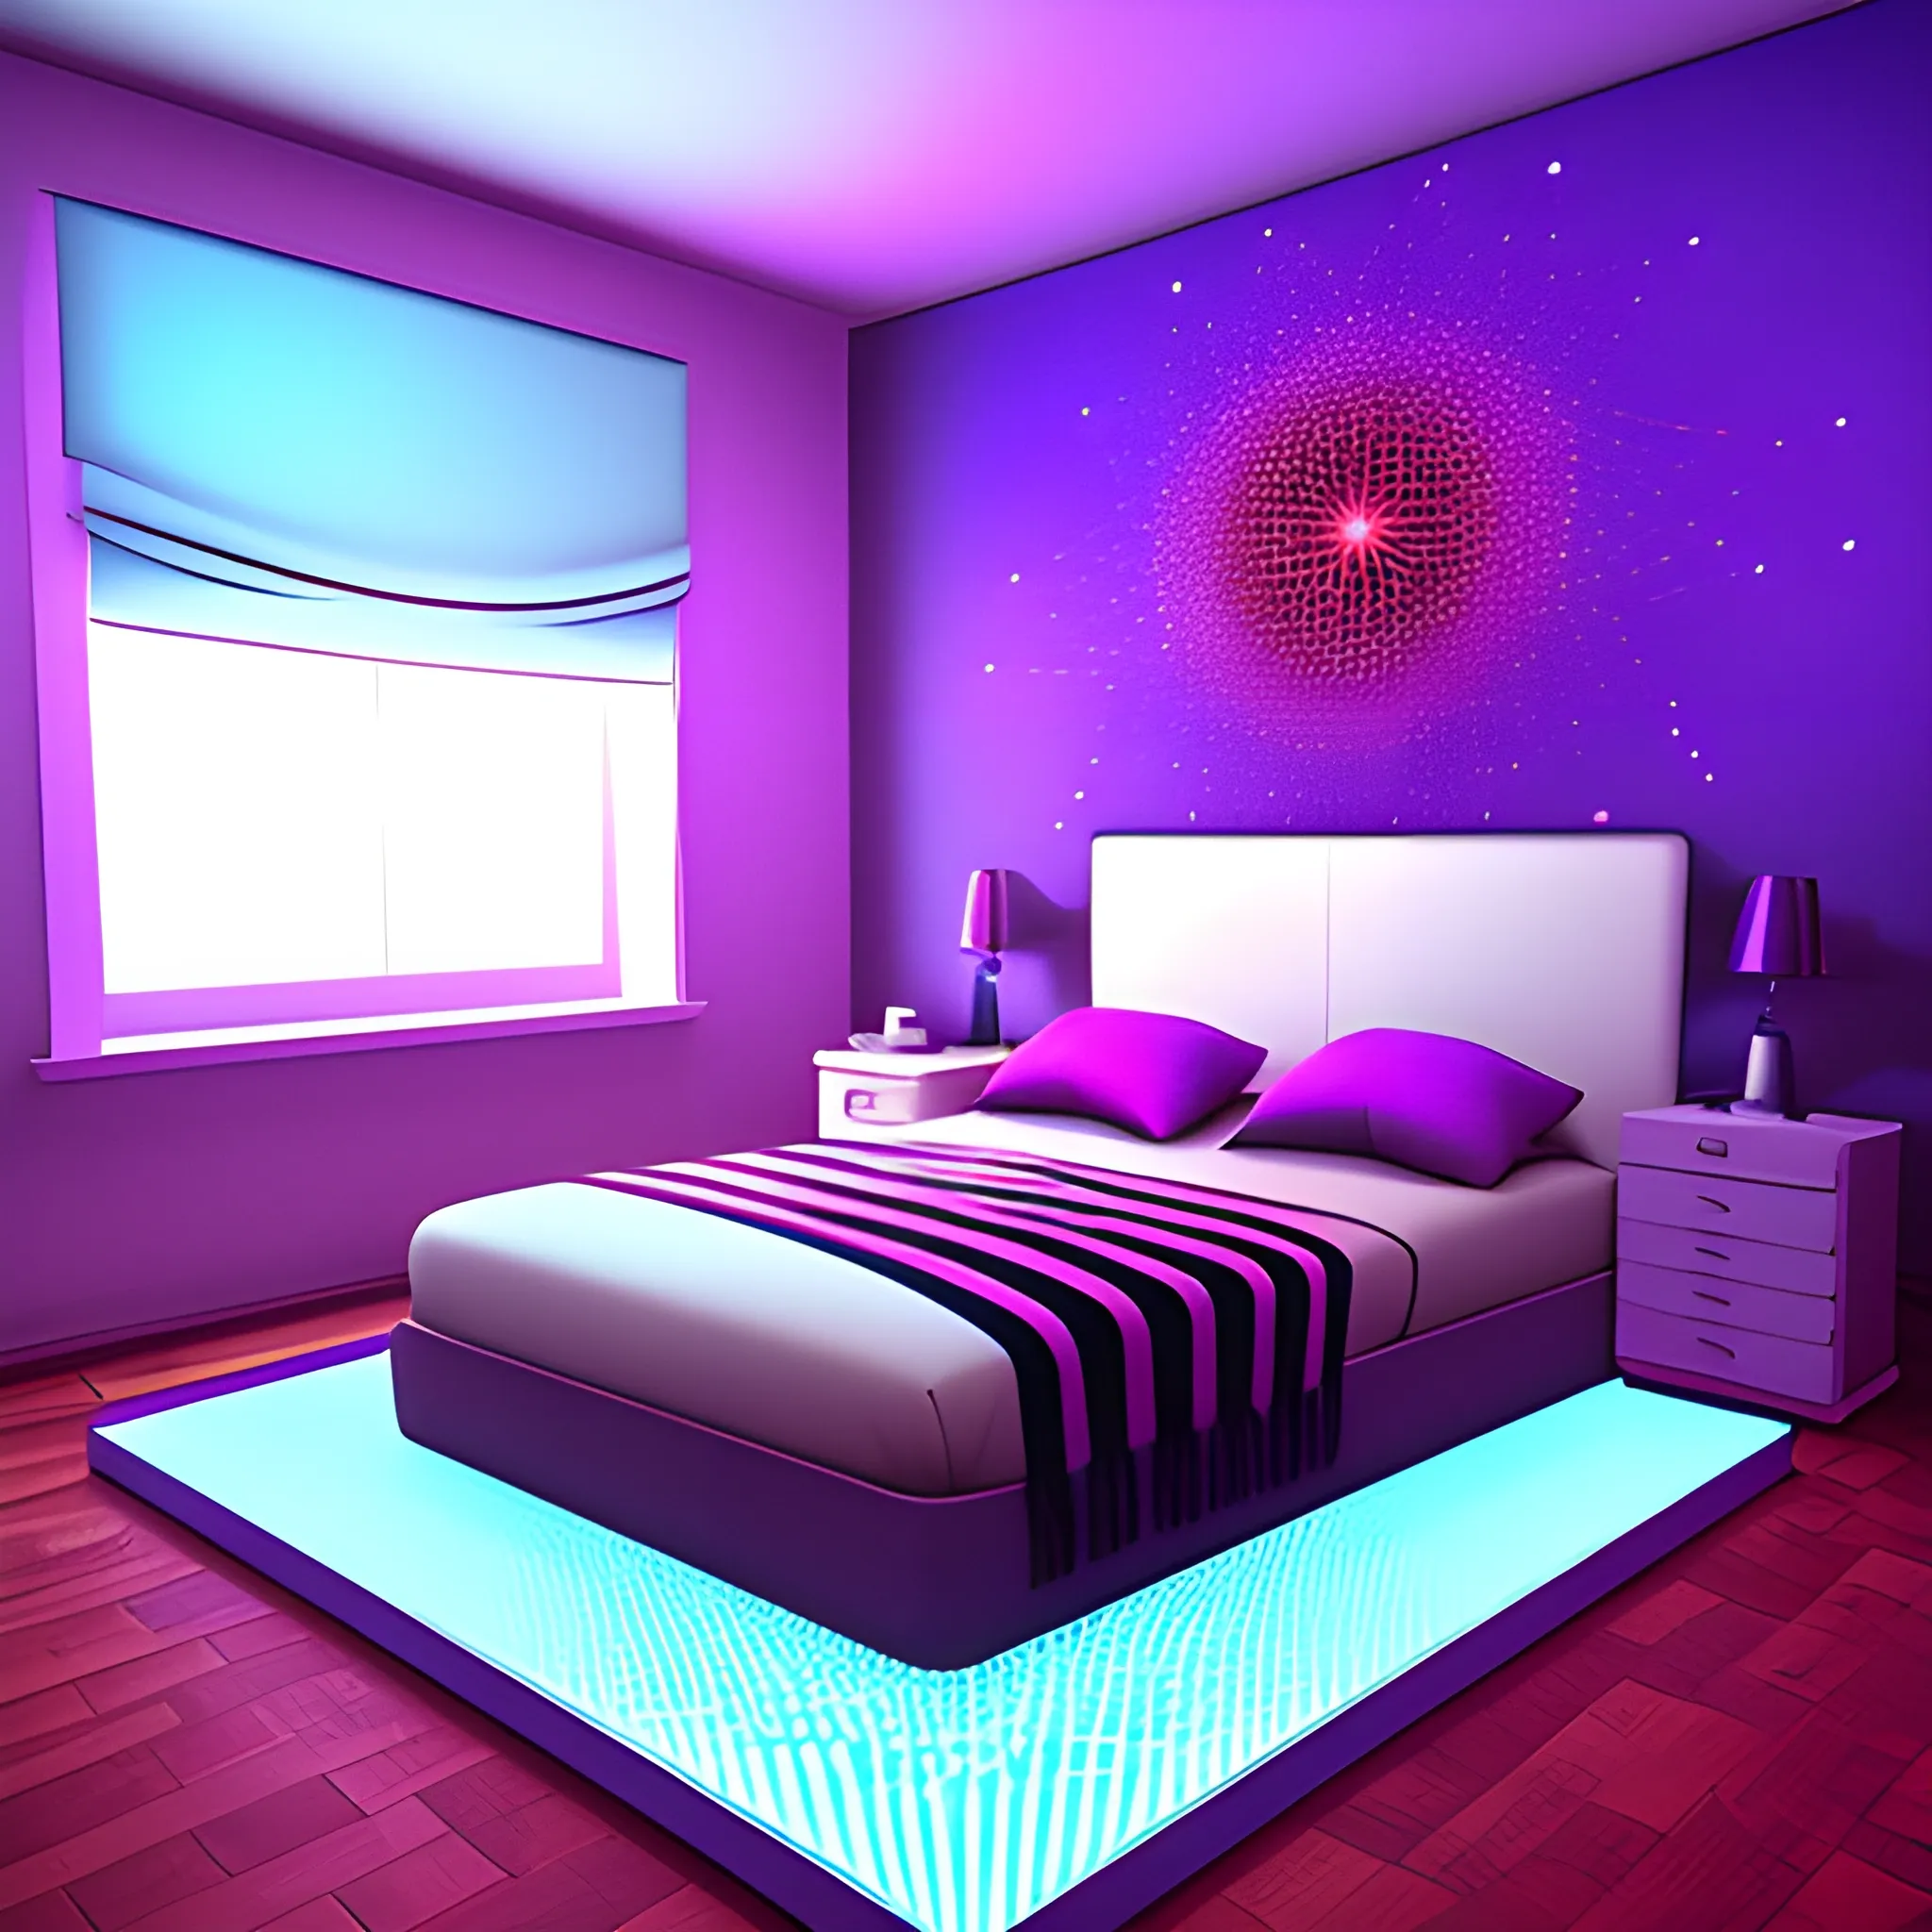 Inside a game, teenager's room, virtual reality headsets on top of the bed, 3D, Trippy